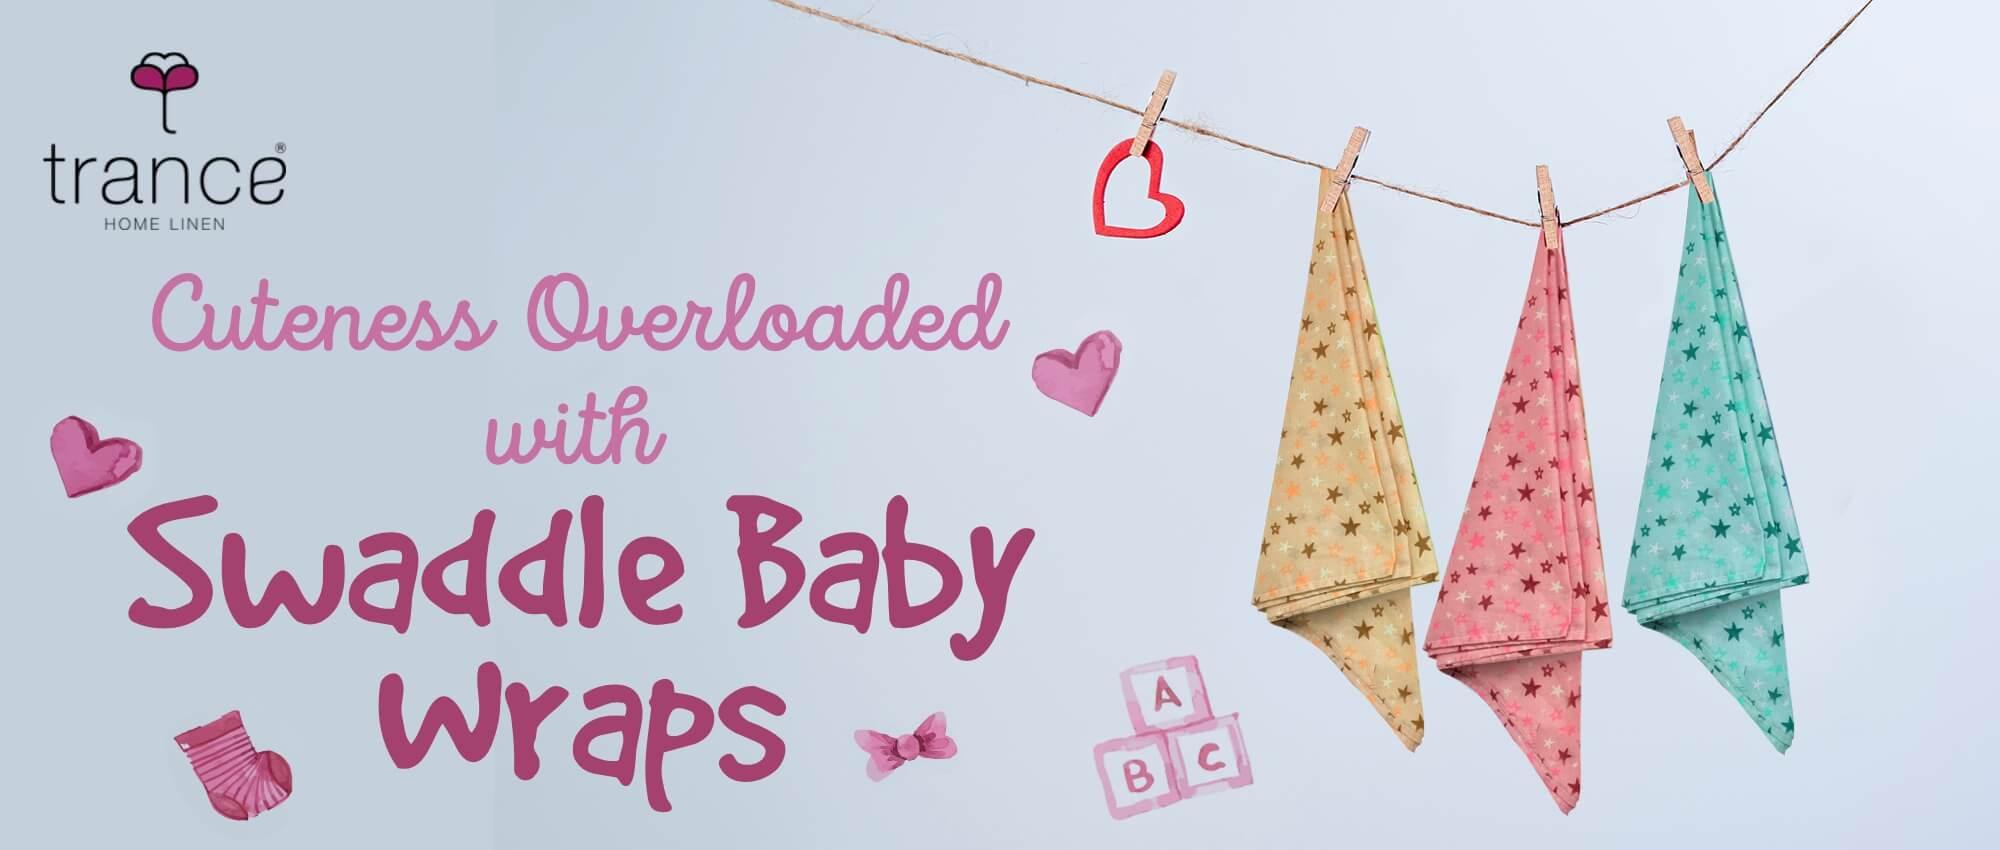 Swaddle-cloth-for-babies